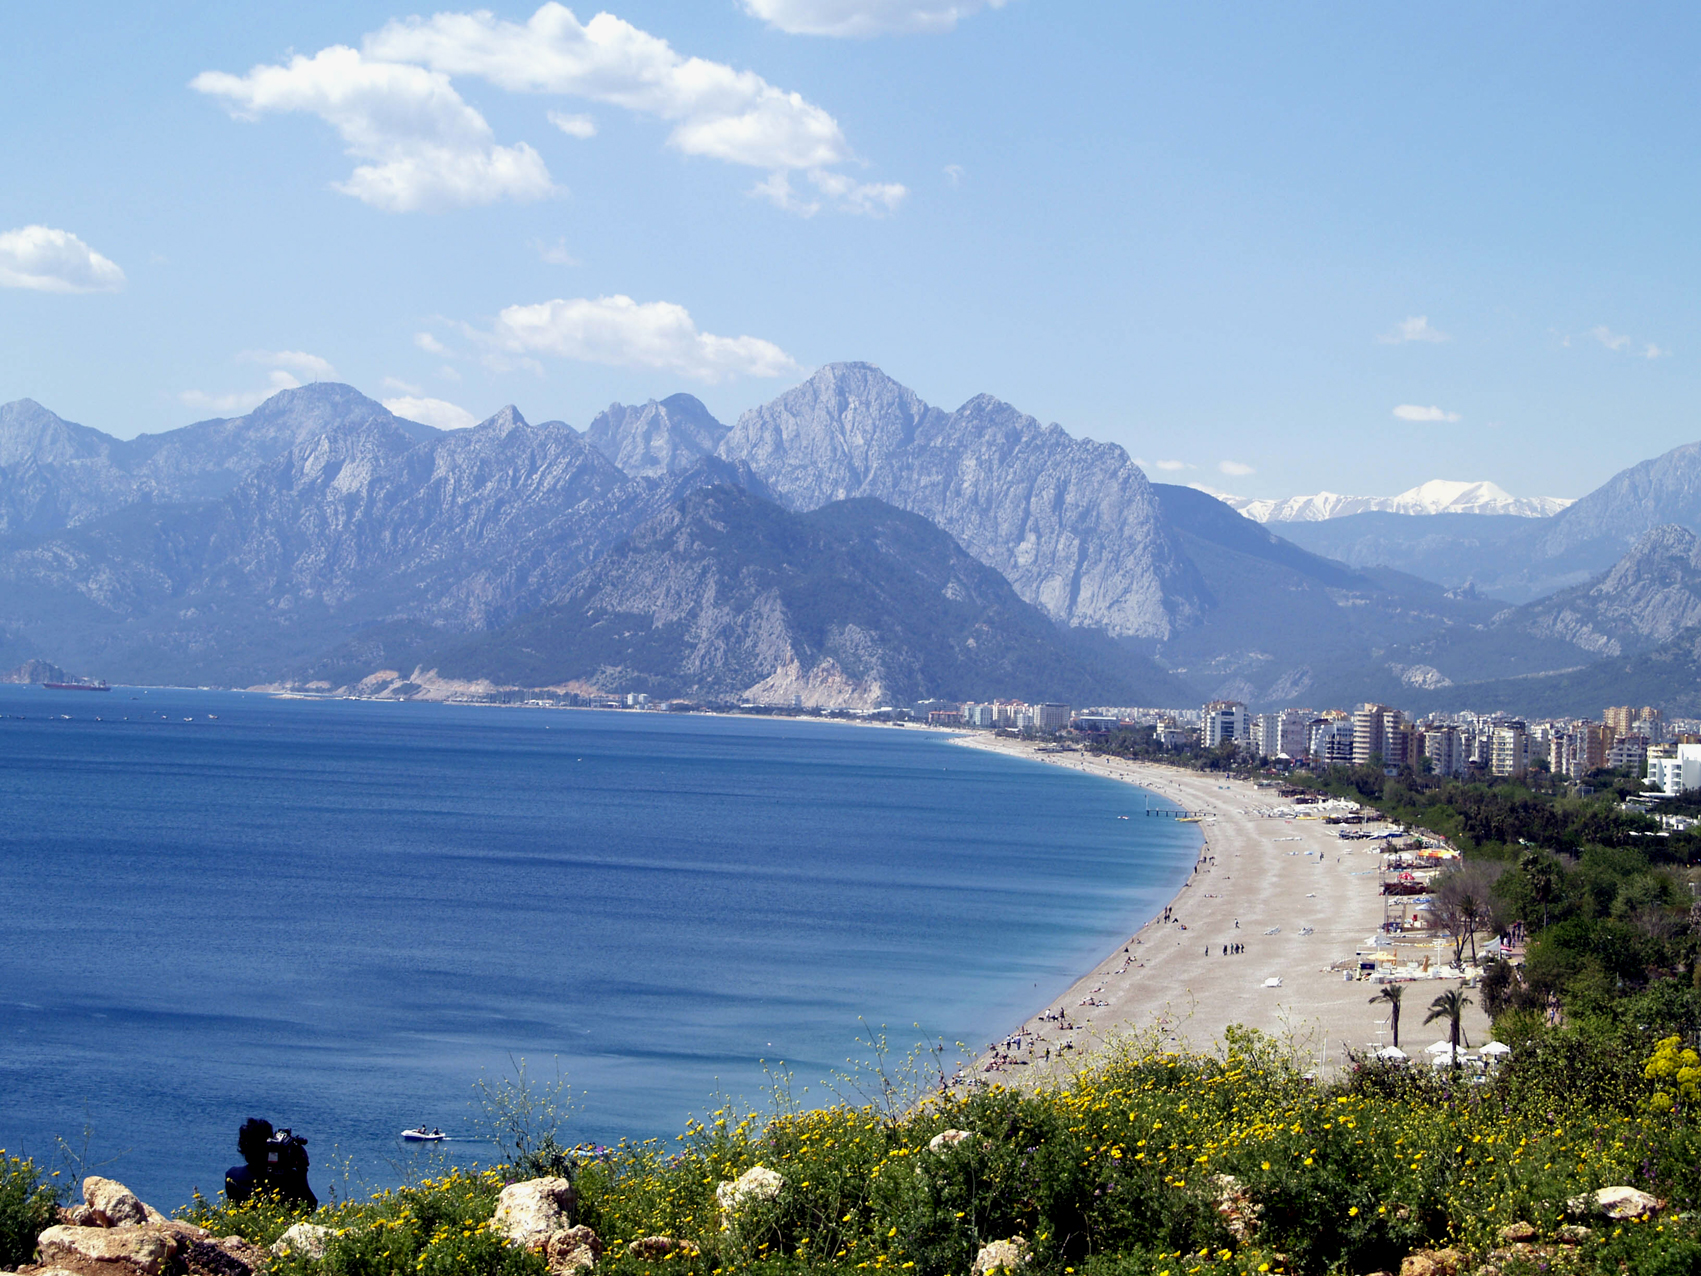 Waterfront Property For Sale in Antalya | Buy A Home, Apartment Or ...